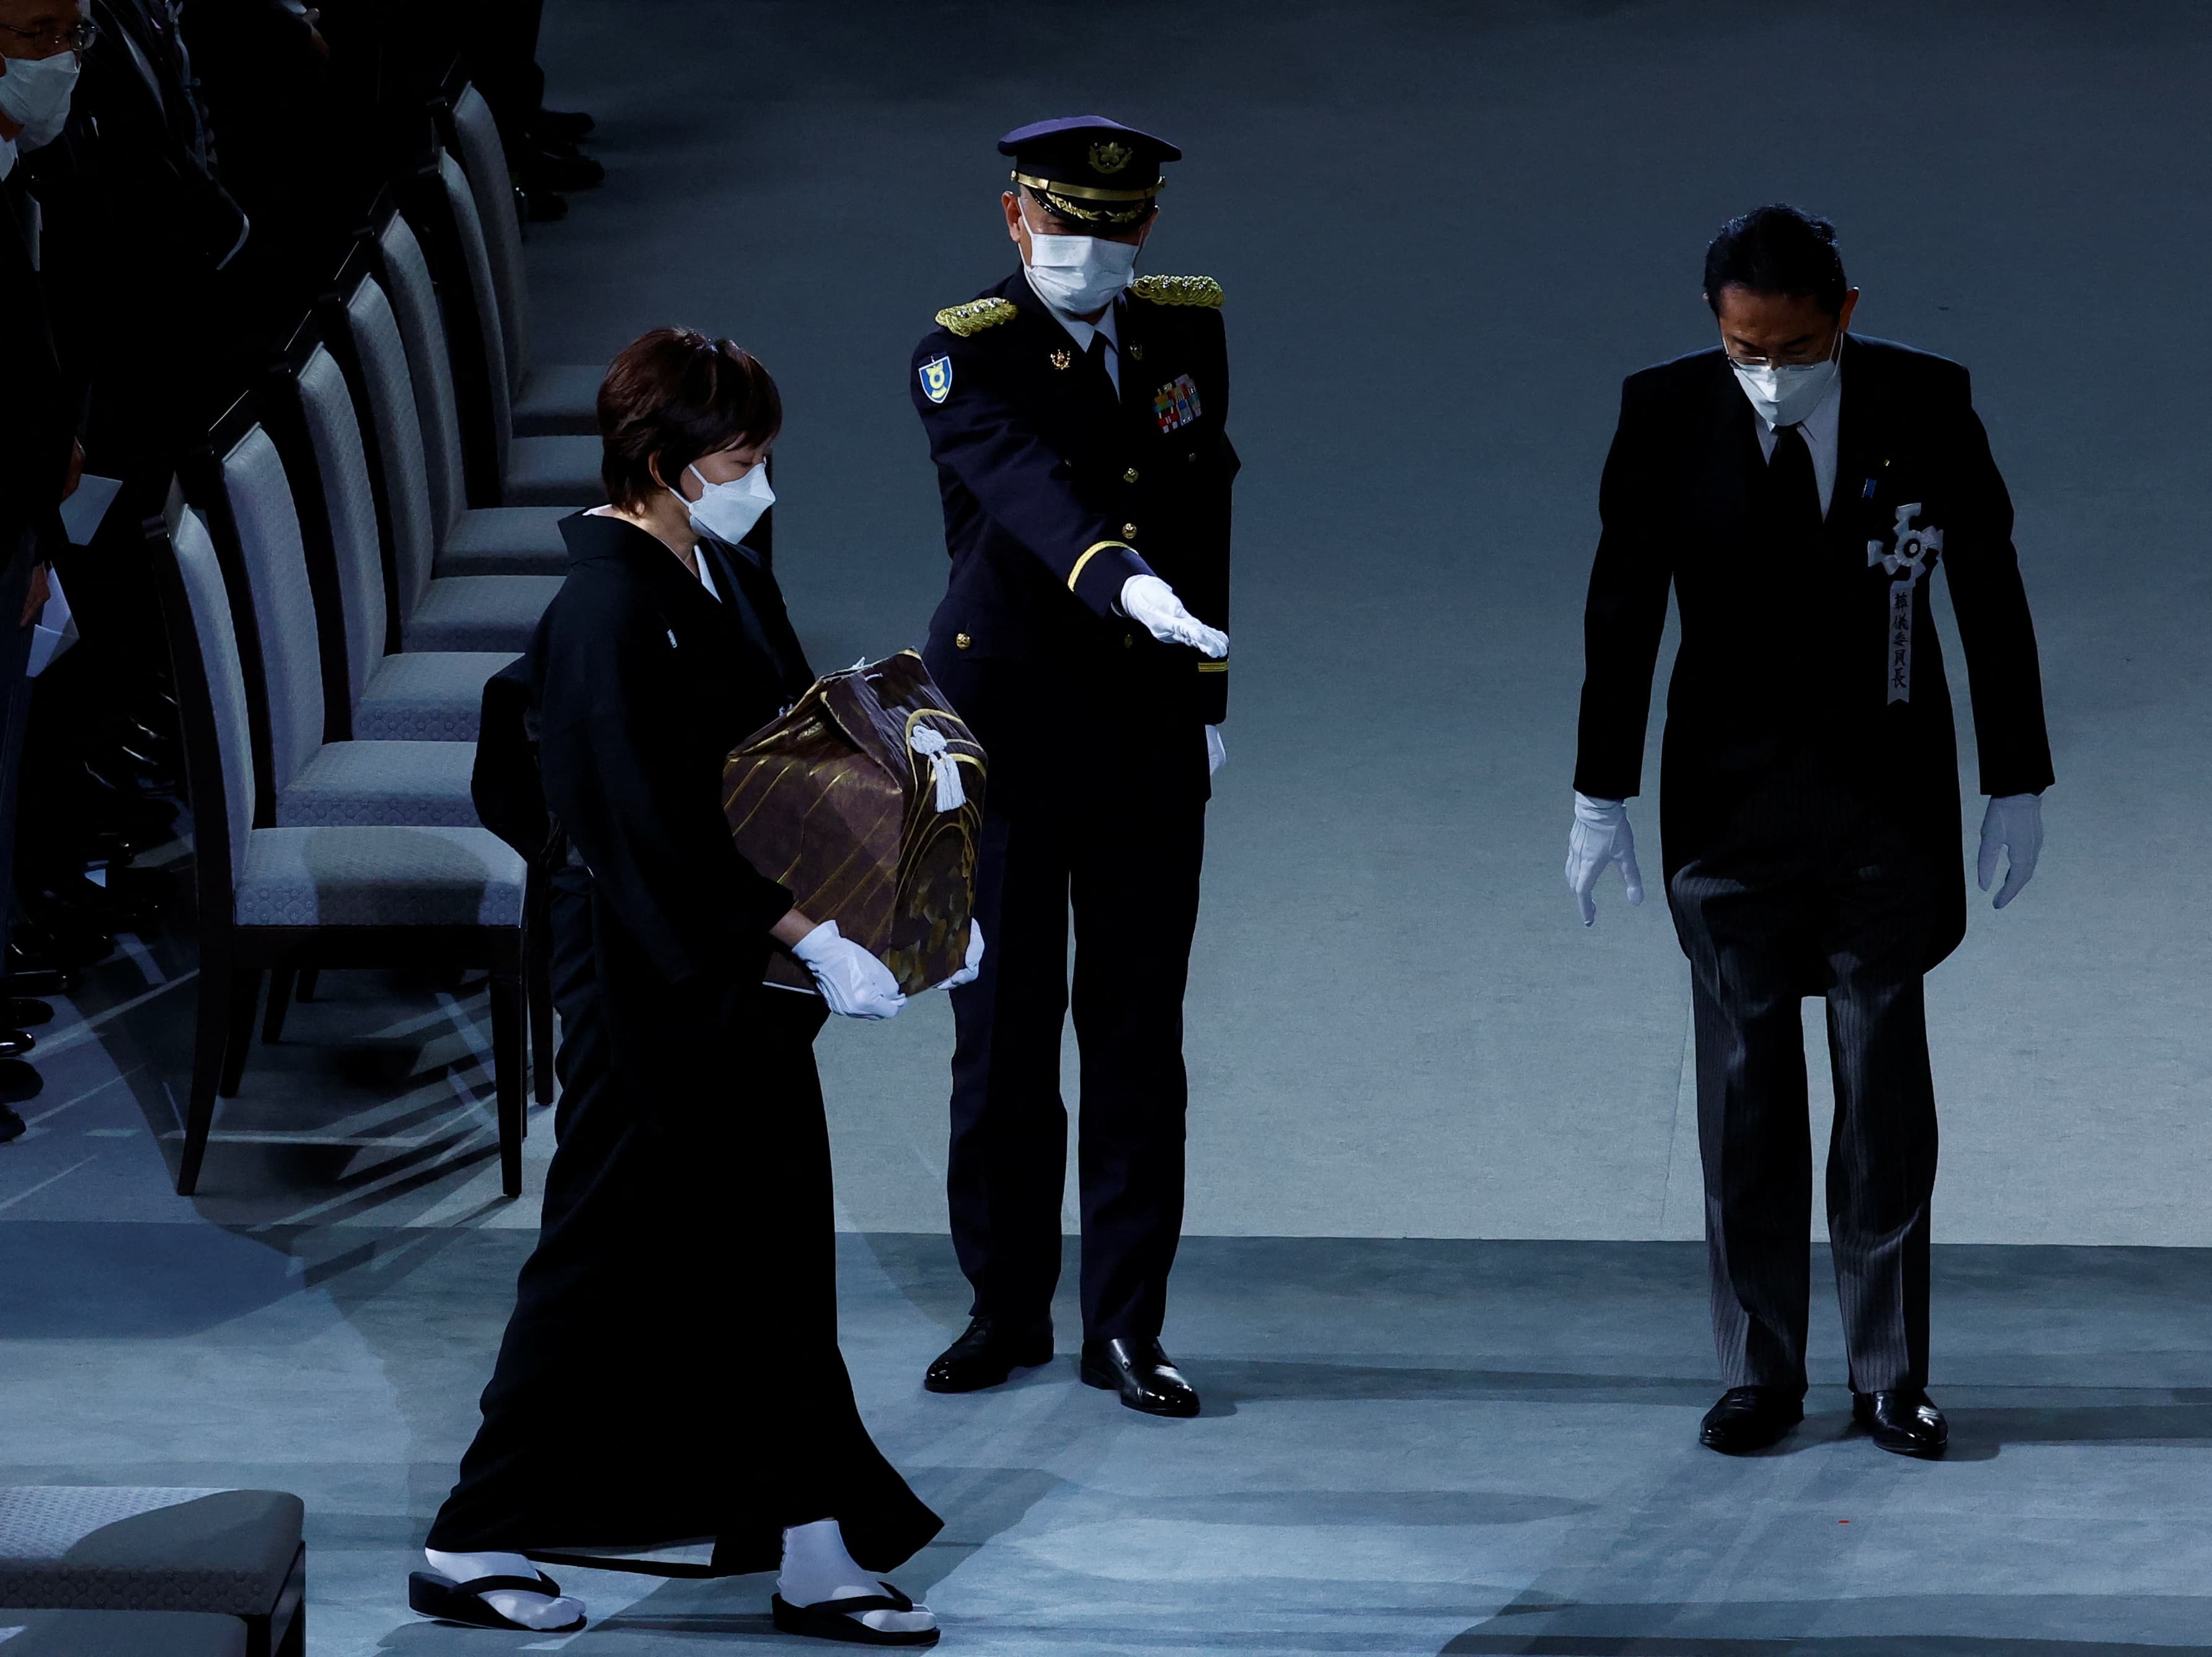 Shinzo Abe State Funeral: Akie Abe, wife of former Japanese Prime Minister Shinzo Abe, attends the state funeral. (Reuters)